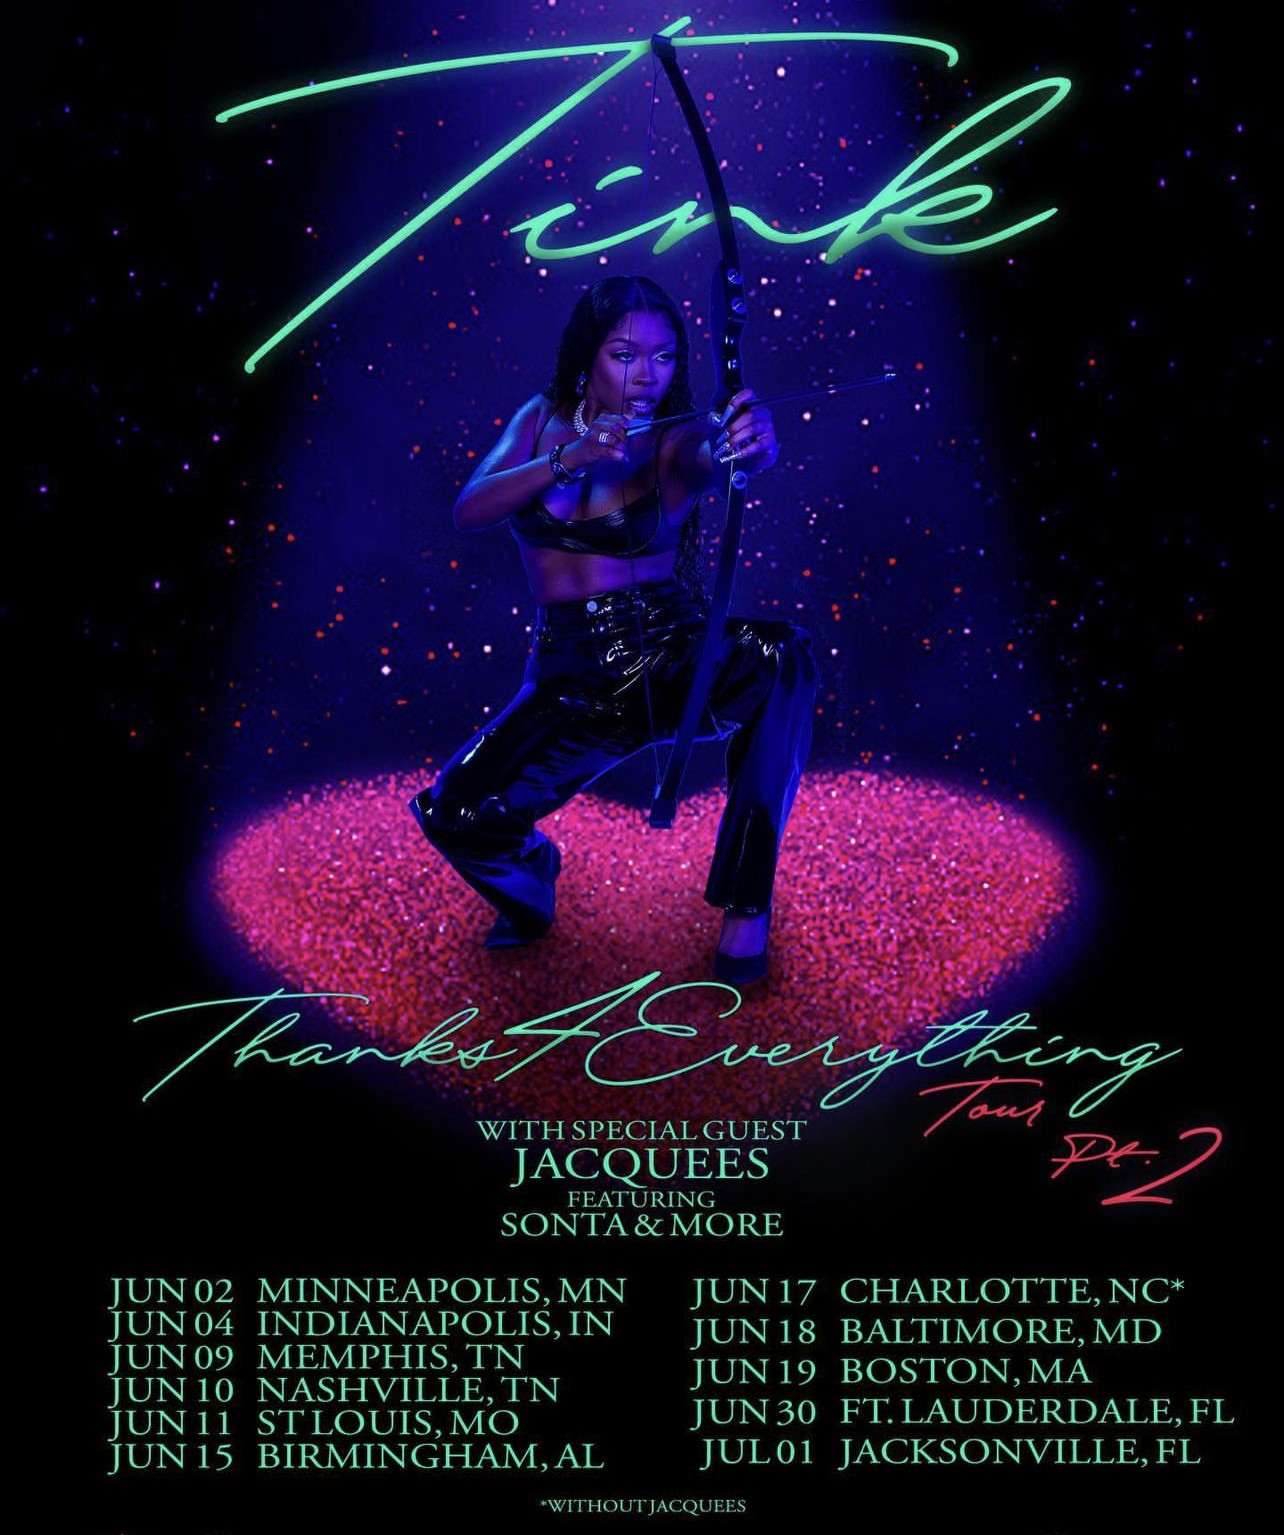 TINK Thanks 4 Everything Tour II on Jul 01, 20:00@LOCATION TO BE ANNOUNCED - Pick a seat, Buy tickets and Get information on TICKETS tickets.bhglabel.com